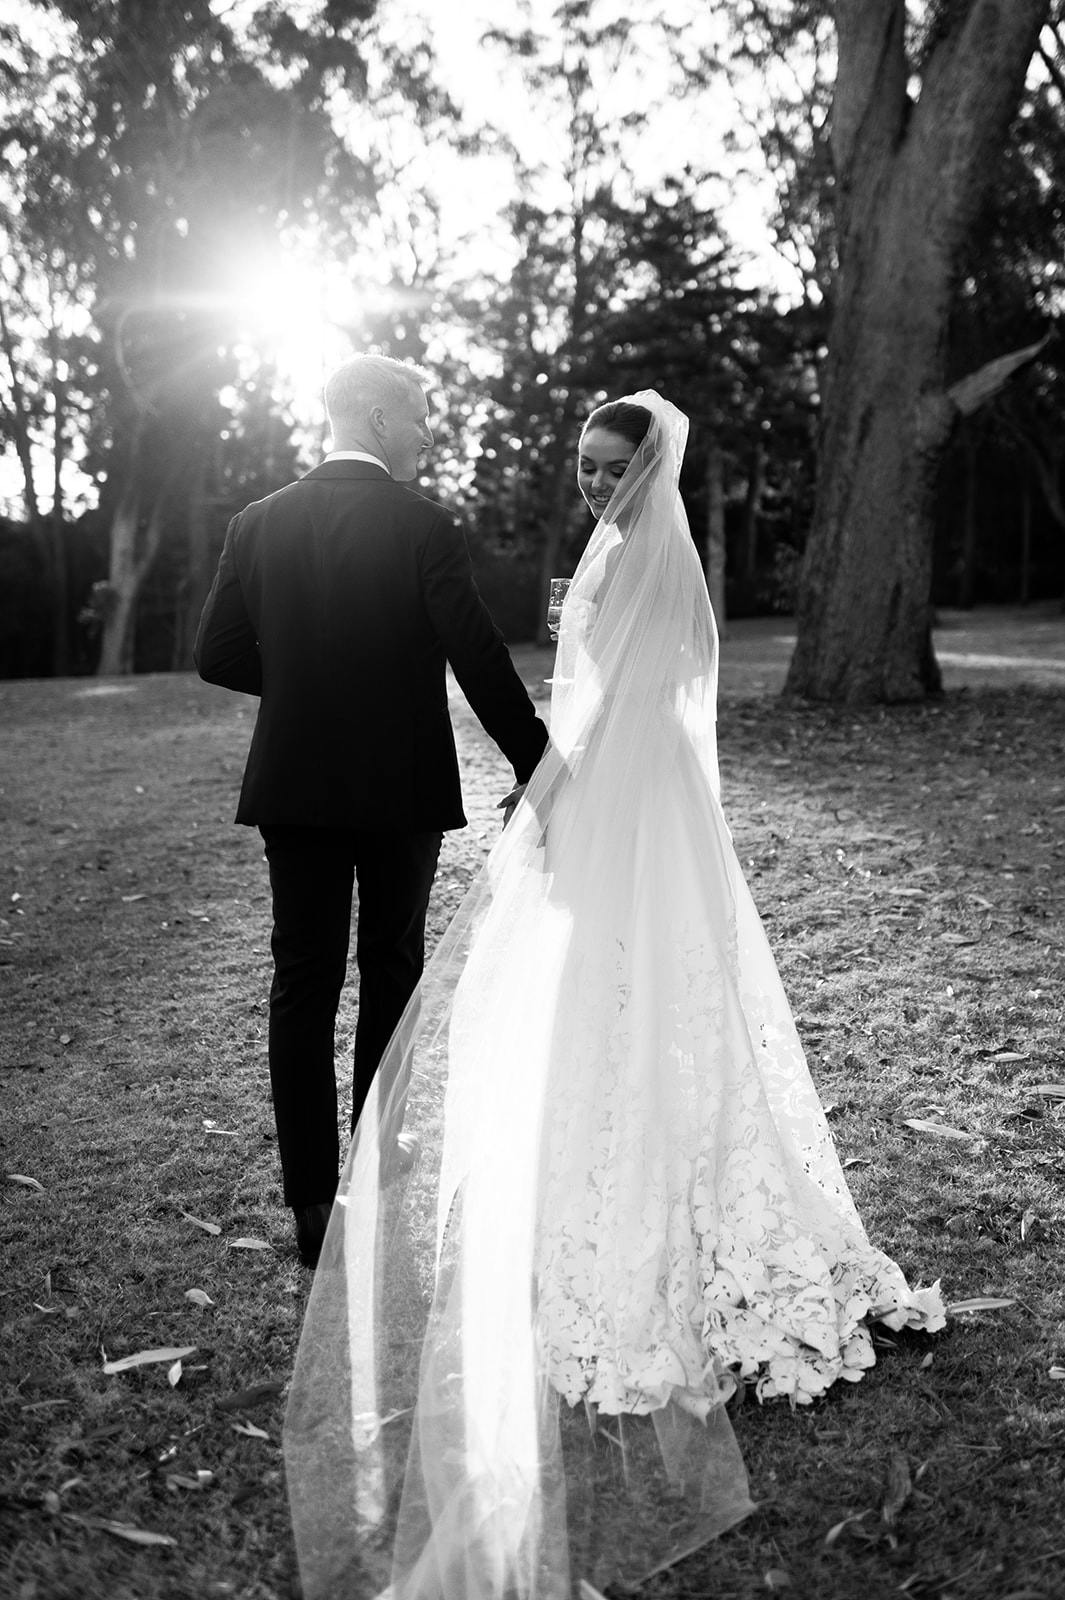 A black and white photograph of a newlywed couple walking hand-in-hand in a park. The bride wears a long, flowing dress with a veil, and the groom is dressed in a suit. The sunlight filters through the trees, casting a soft glow on the couple.